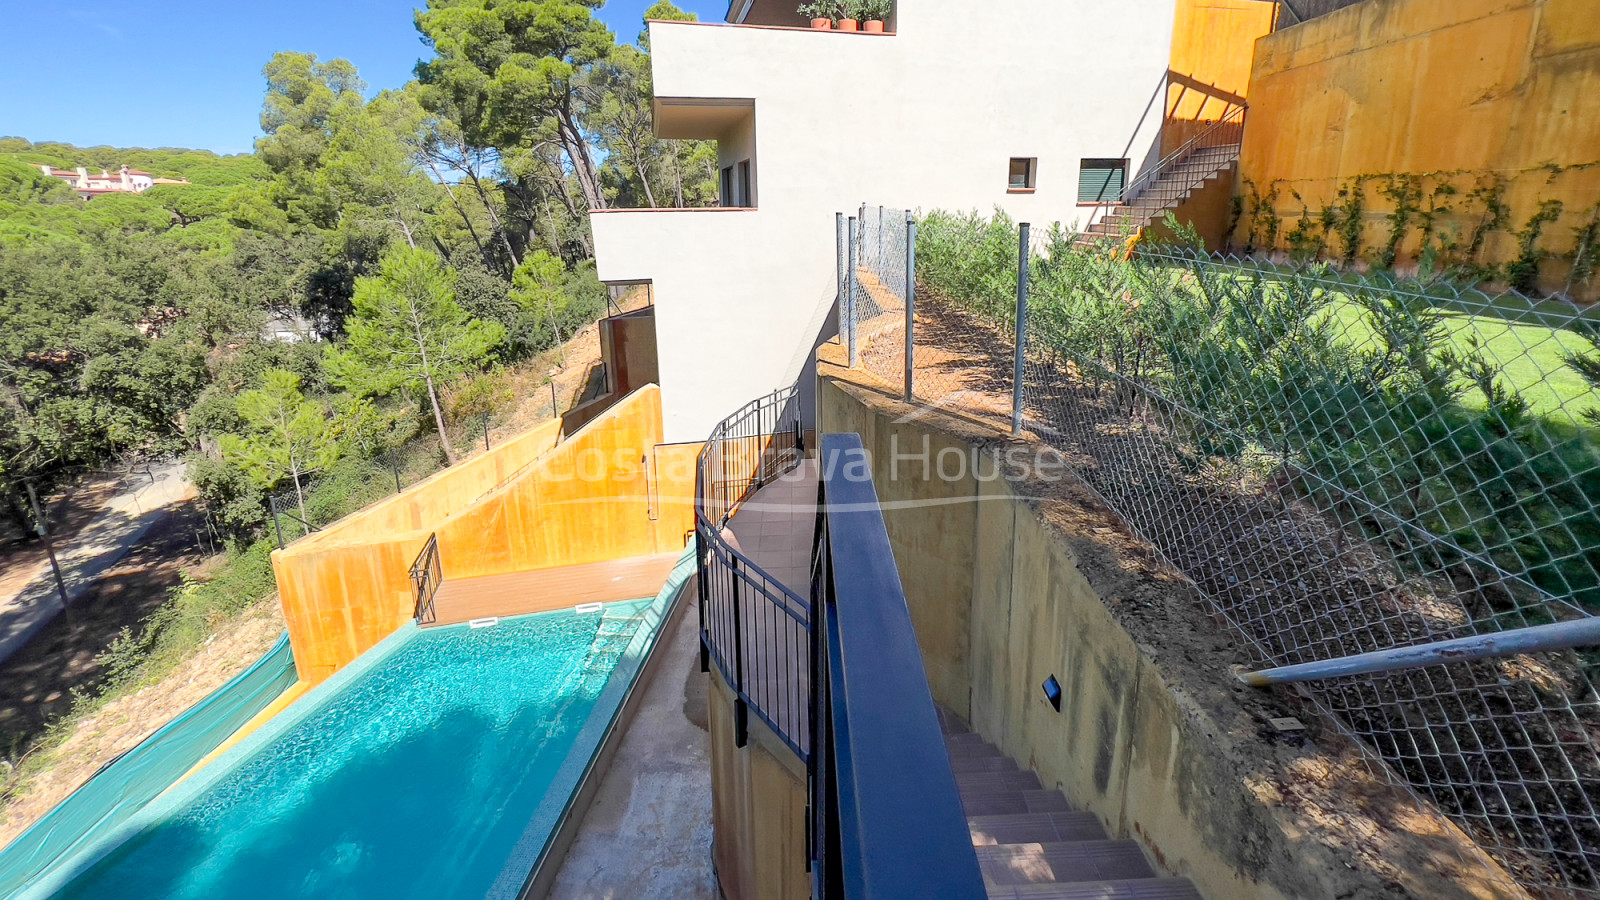 Apartment with terrace and pool in Begur, 5 minutes from Sa Riera beach